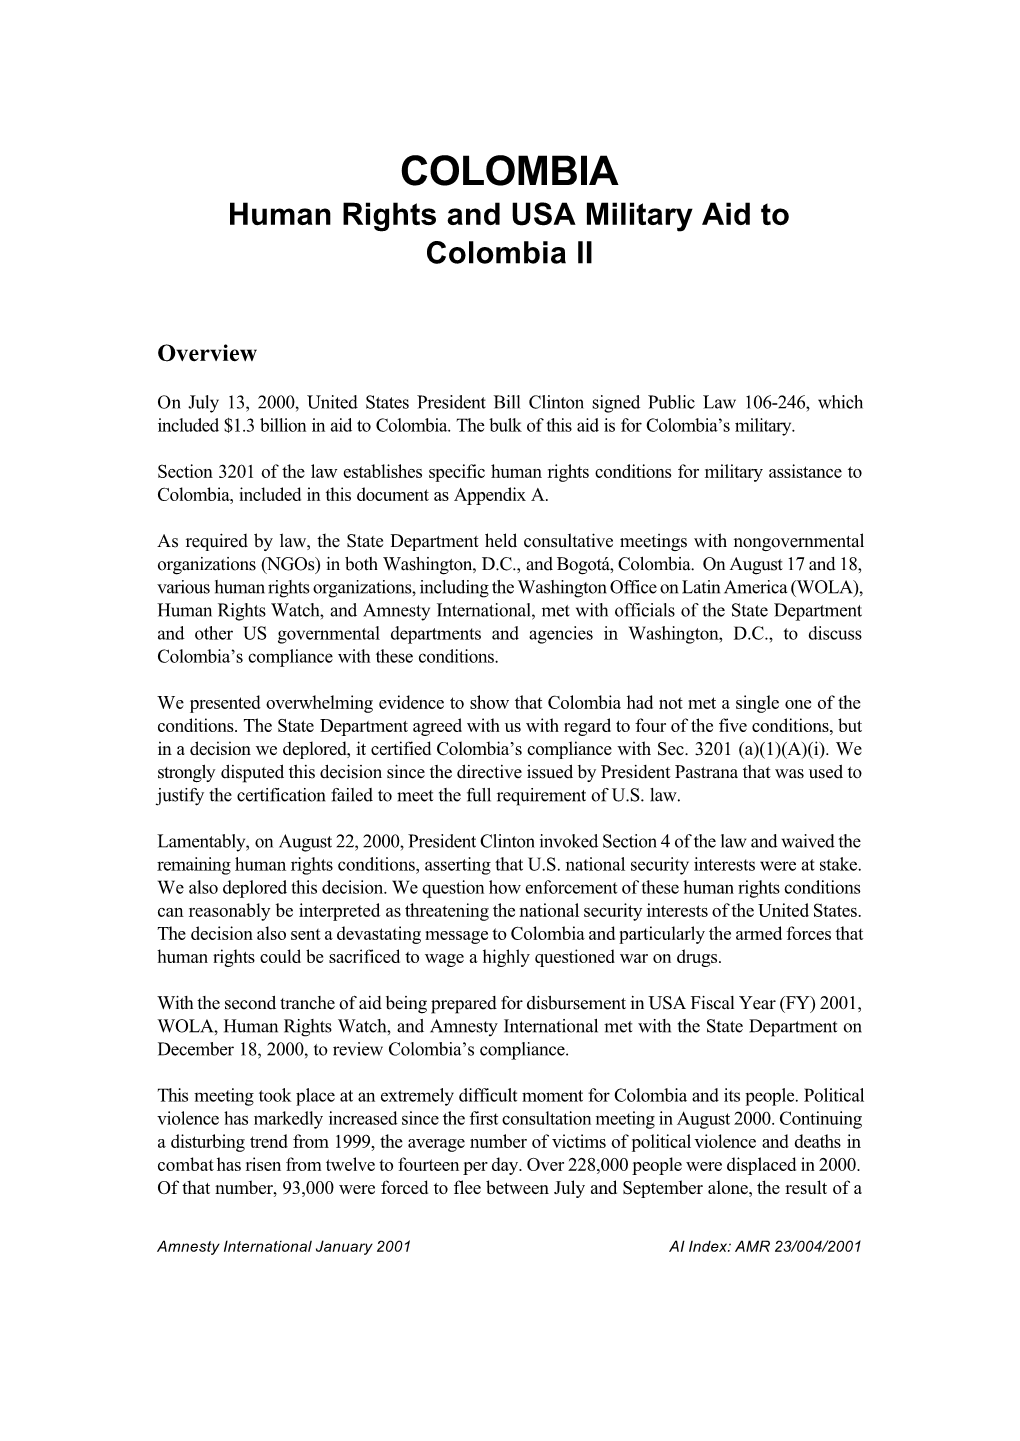 Human Rights and USA Military Aid to Colombia II